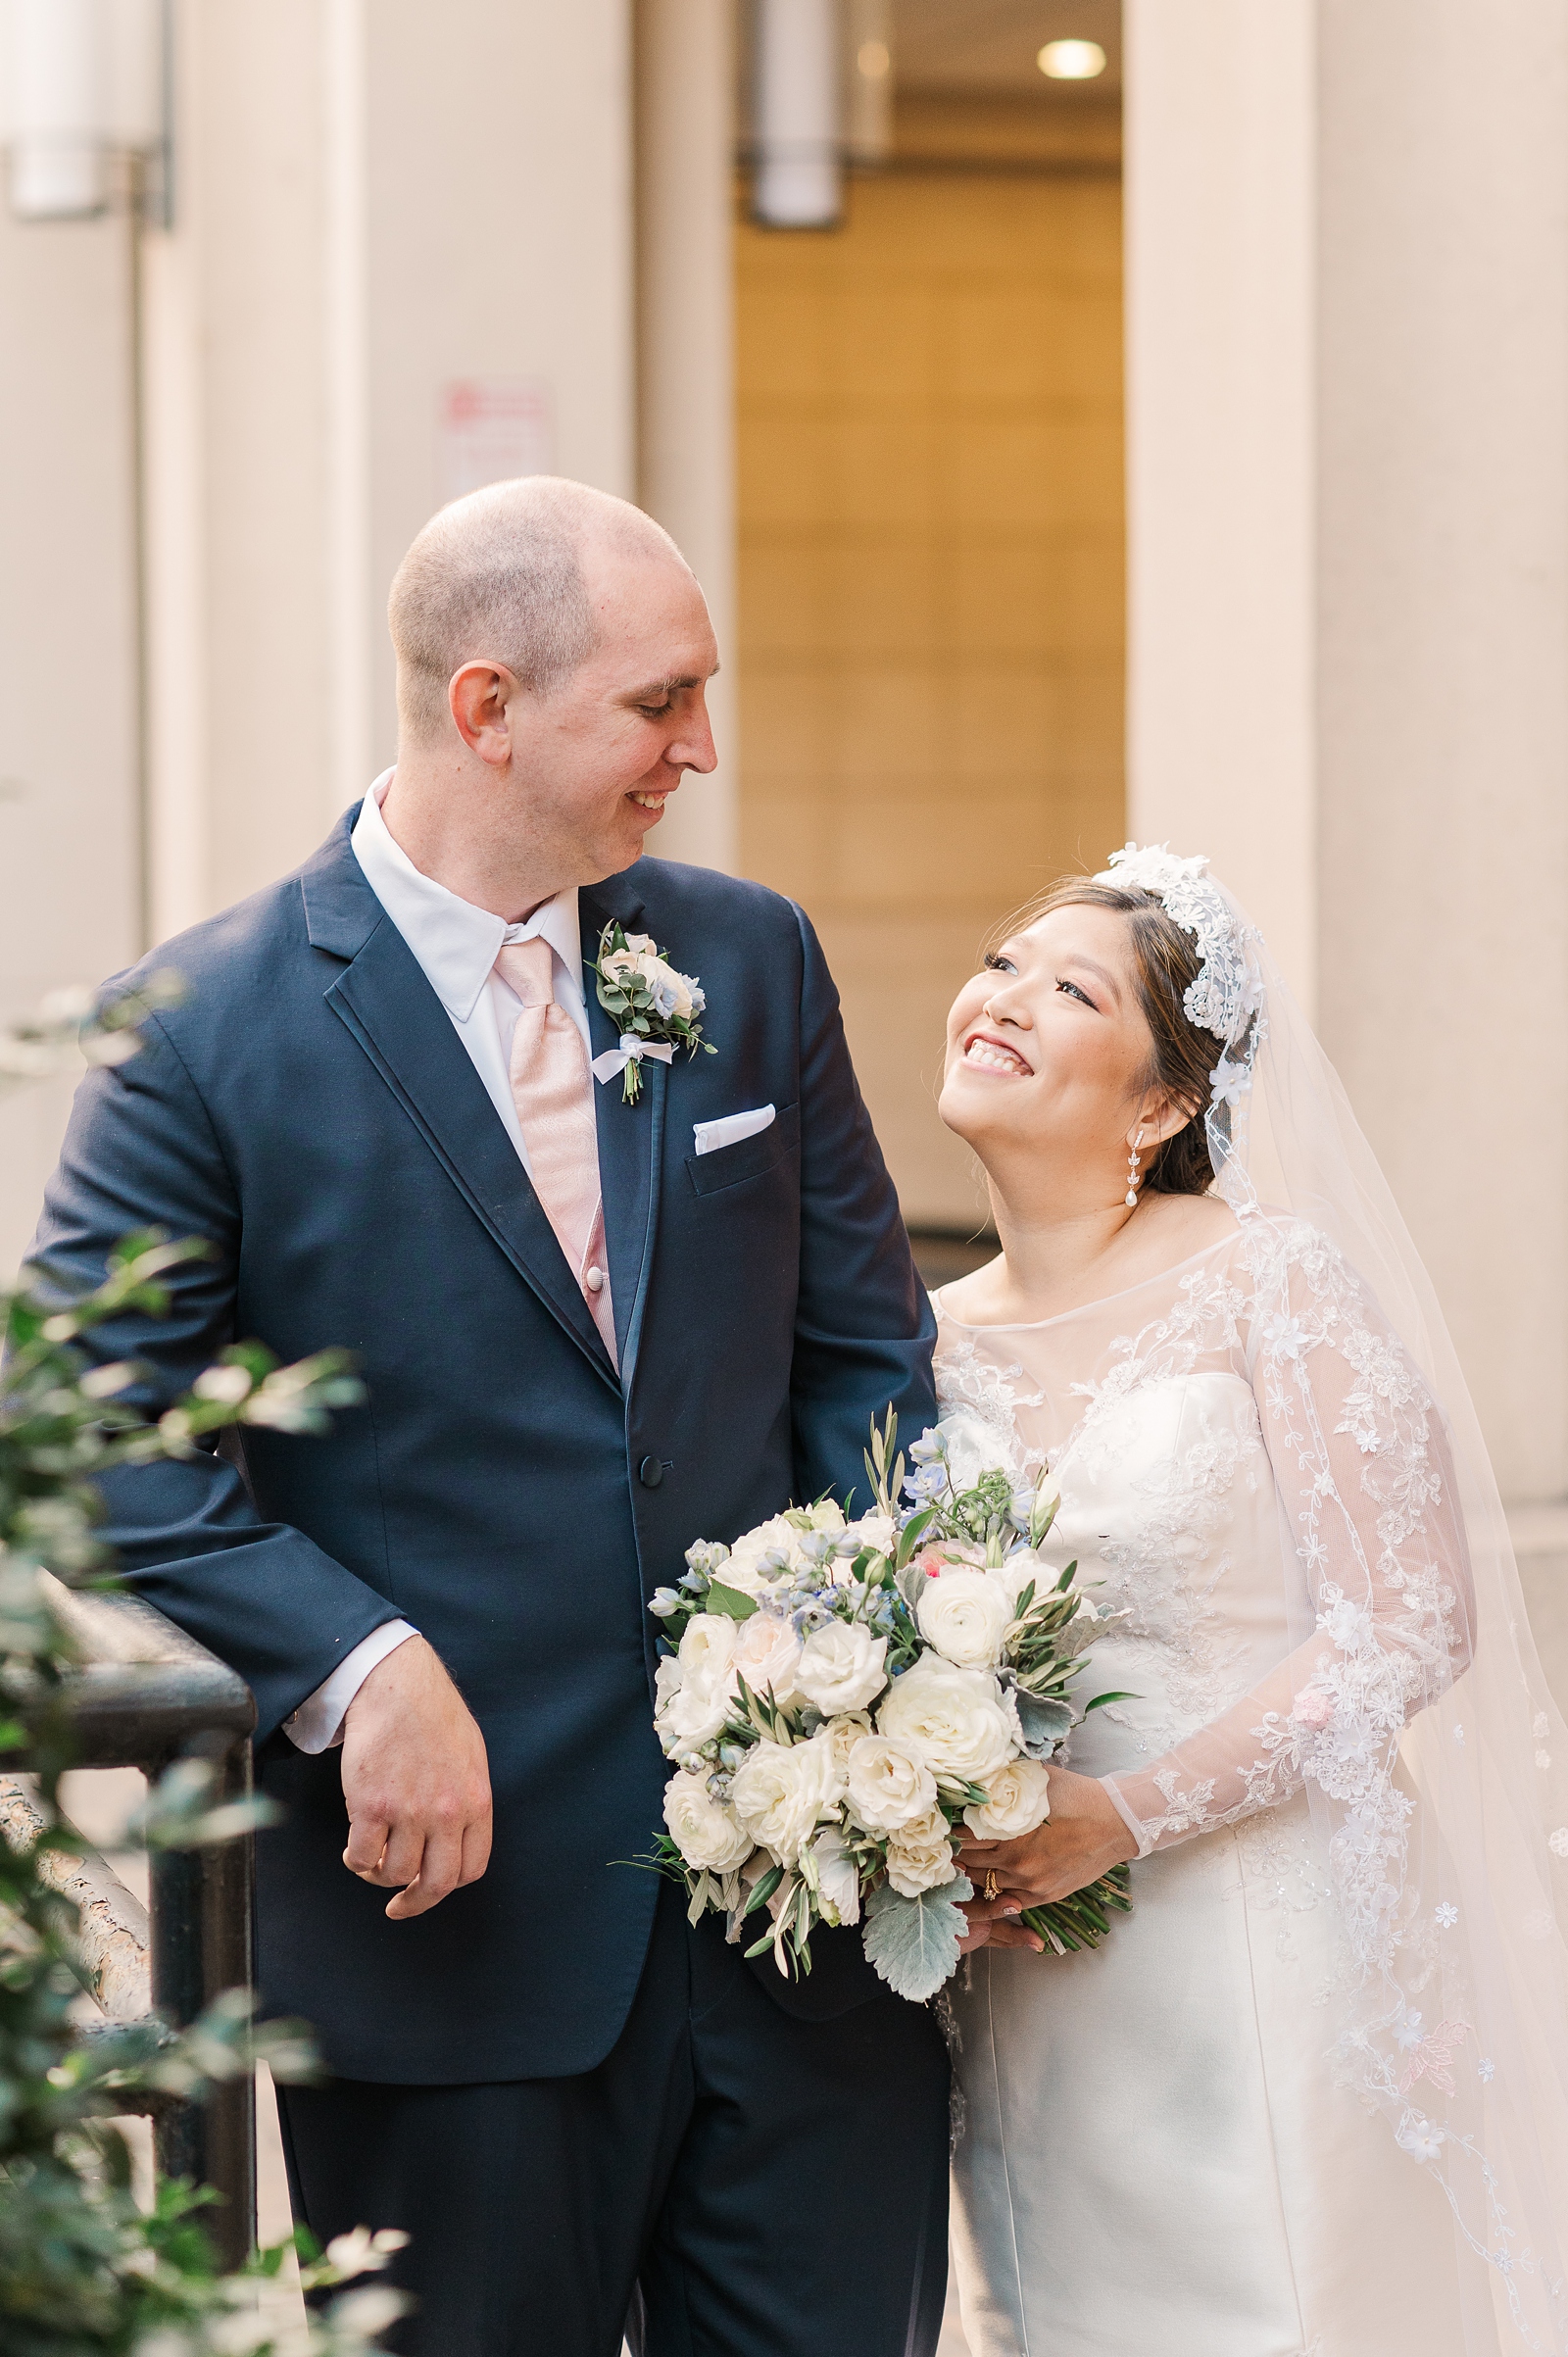 Bride and Groom Portraits at Richmond Intimate Wedding. Photography by Virginia Wedding Photographer Kailey Brianne Photography. 

